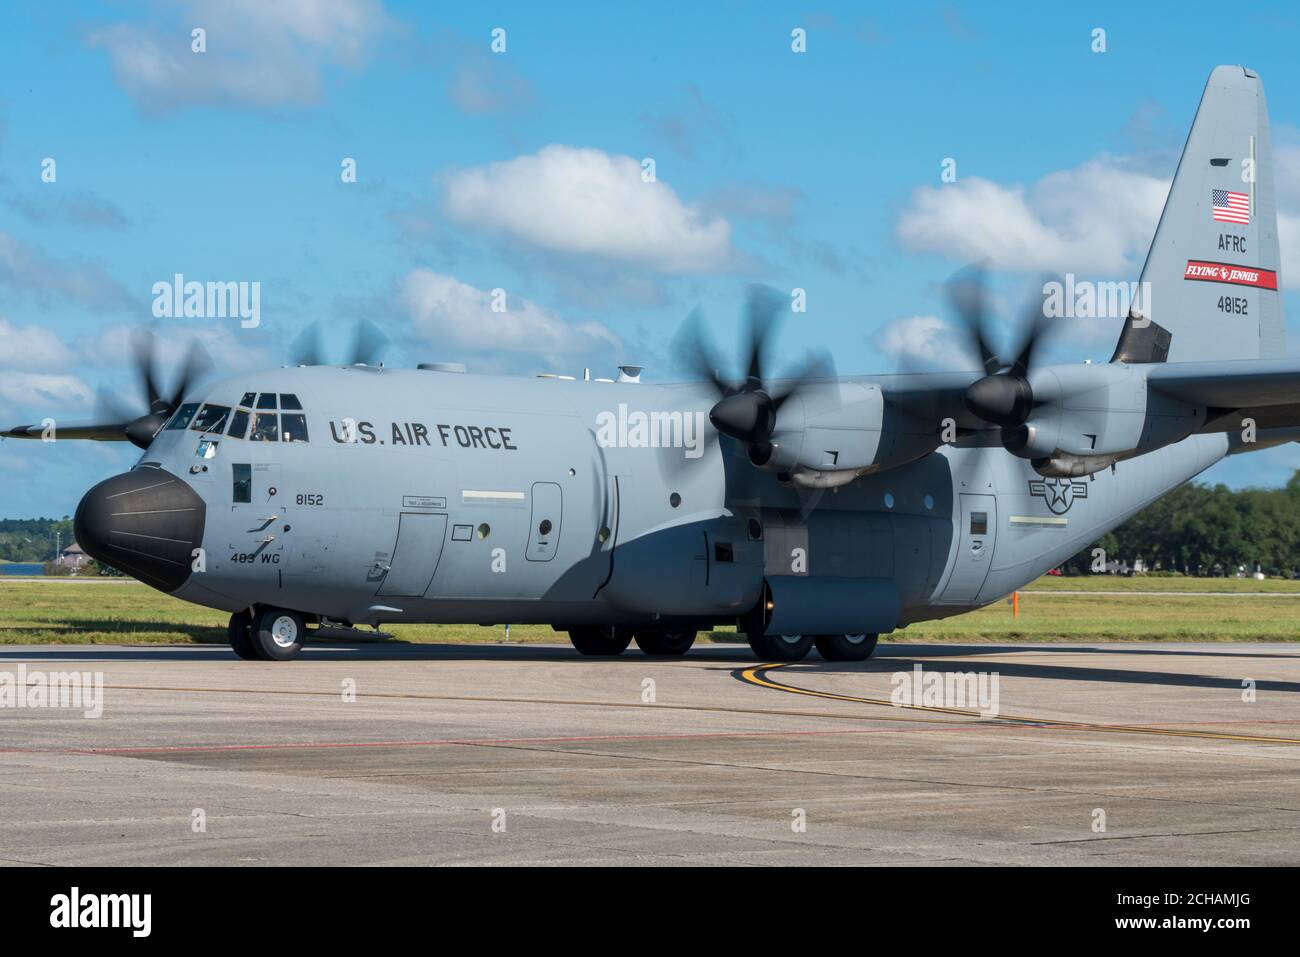 The Air Force Reserve 403rd Wing began evacuating its aircraft due to the impending weather conditions Tropical Sally is forecasted to create Sept. 13, 2020. The 815th Airlift Squadron C-130J 'Flying Jennies' and the 53rd Weather Reconnaissance Squadron WC-130J 'Hurricane Hunters' relocated to Joint Base San Antonio and Ellington Airport, Texas. The 53rd WRS will continue to fly data collection missions to support the National Hurricane Center from Ellington. (U.S. Air Force photo by Senior Airman Kristen Pittman) Stock Photo